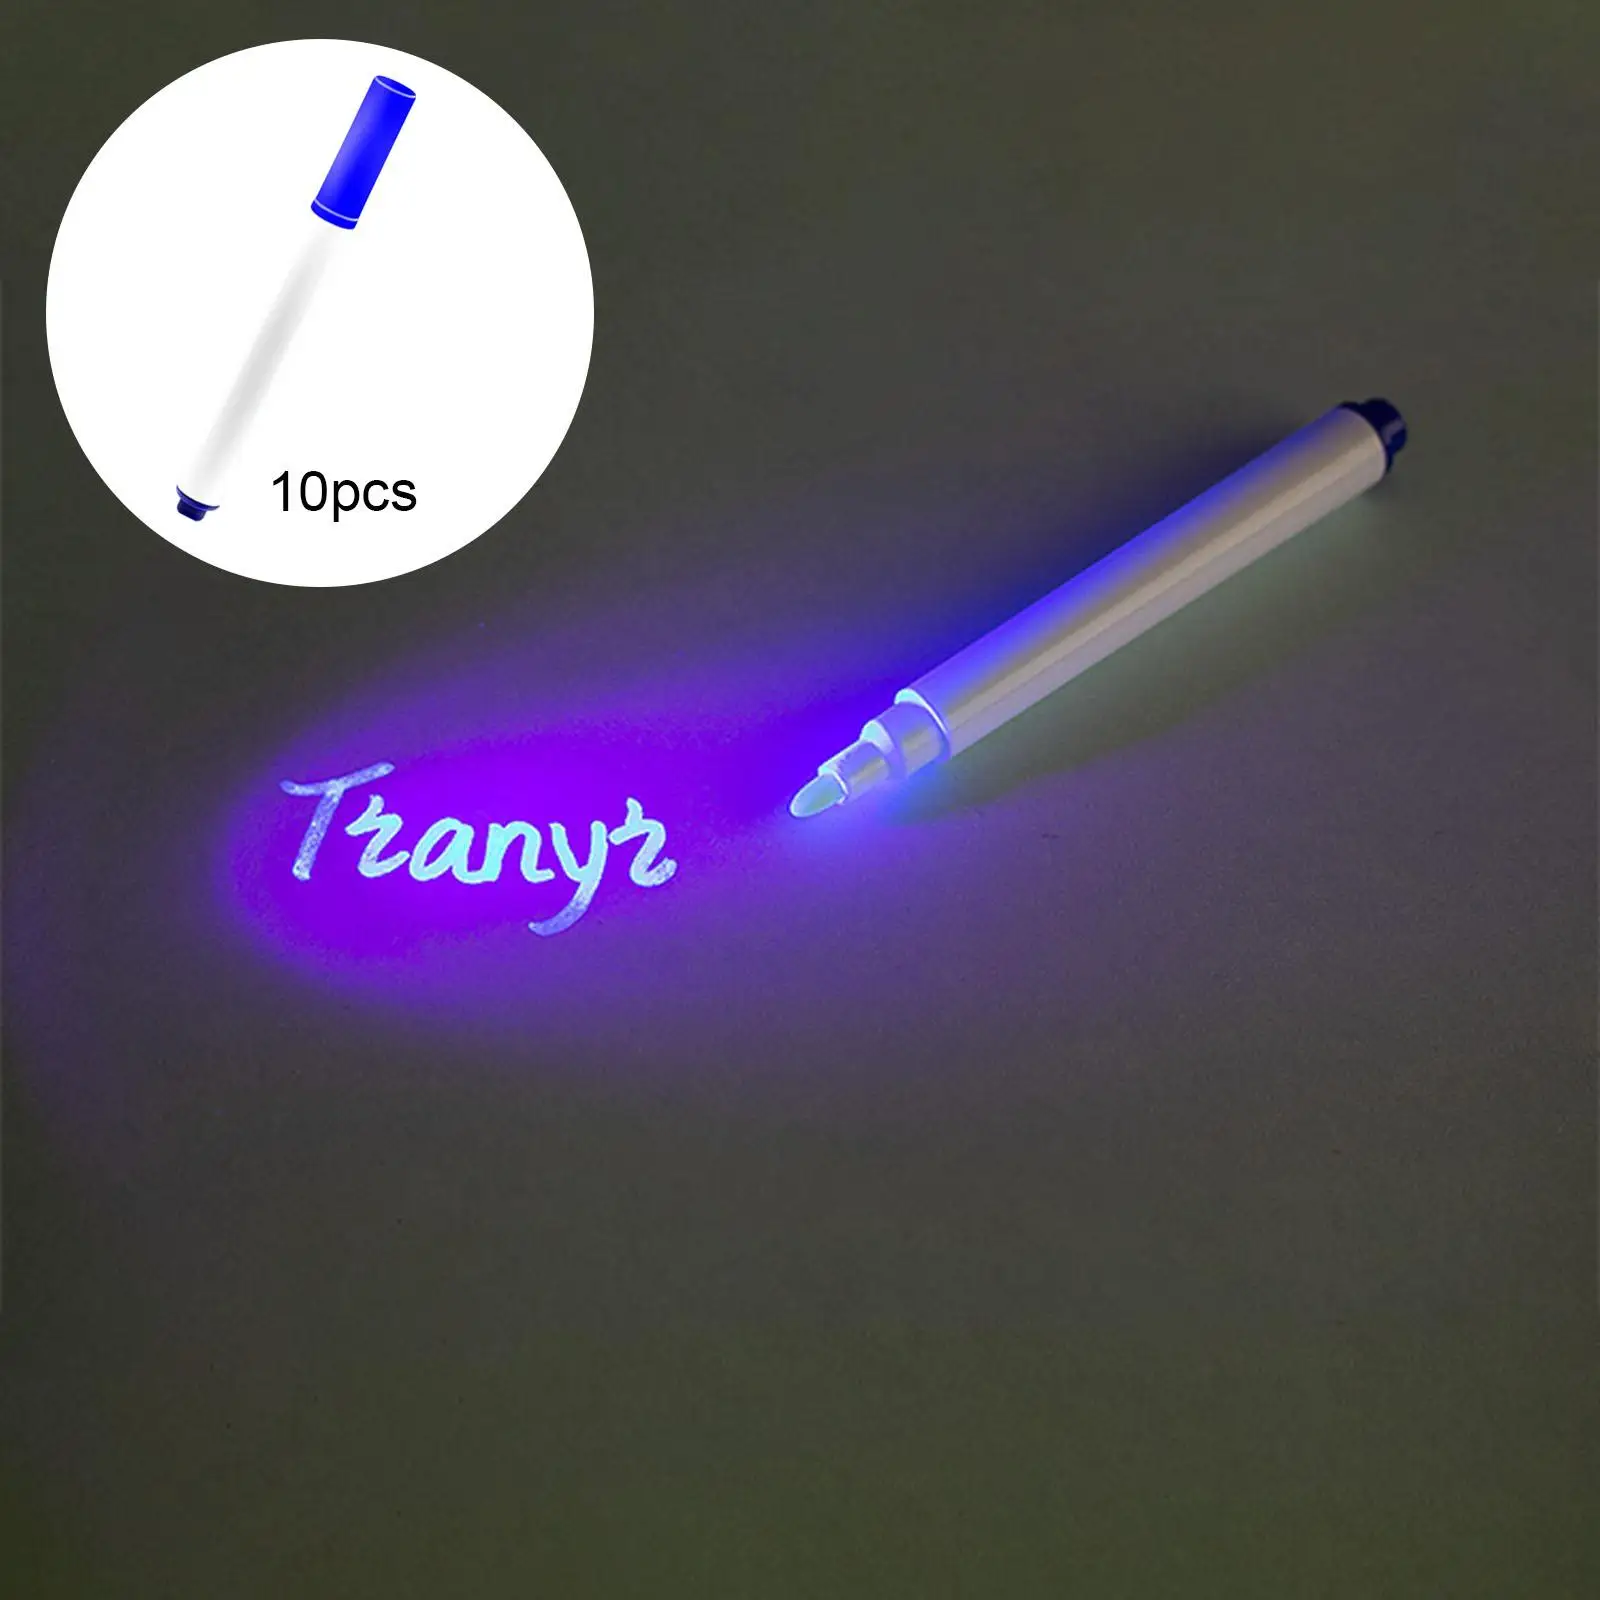 10Pcs Invisible Ink Pen Marker Pens 0.5cm Point Painting Writing Drawing for Birthday Notes Doodle Halloween Party Bags